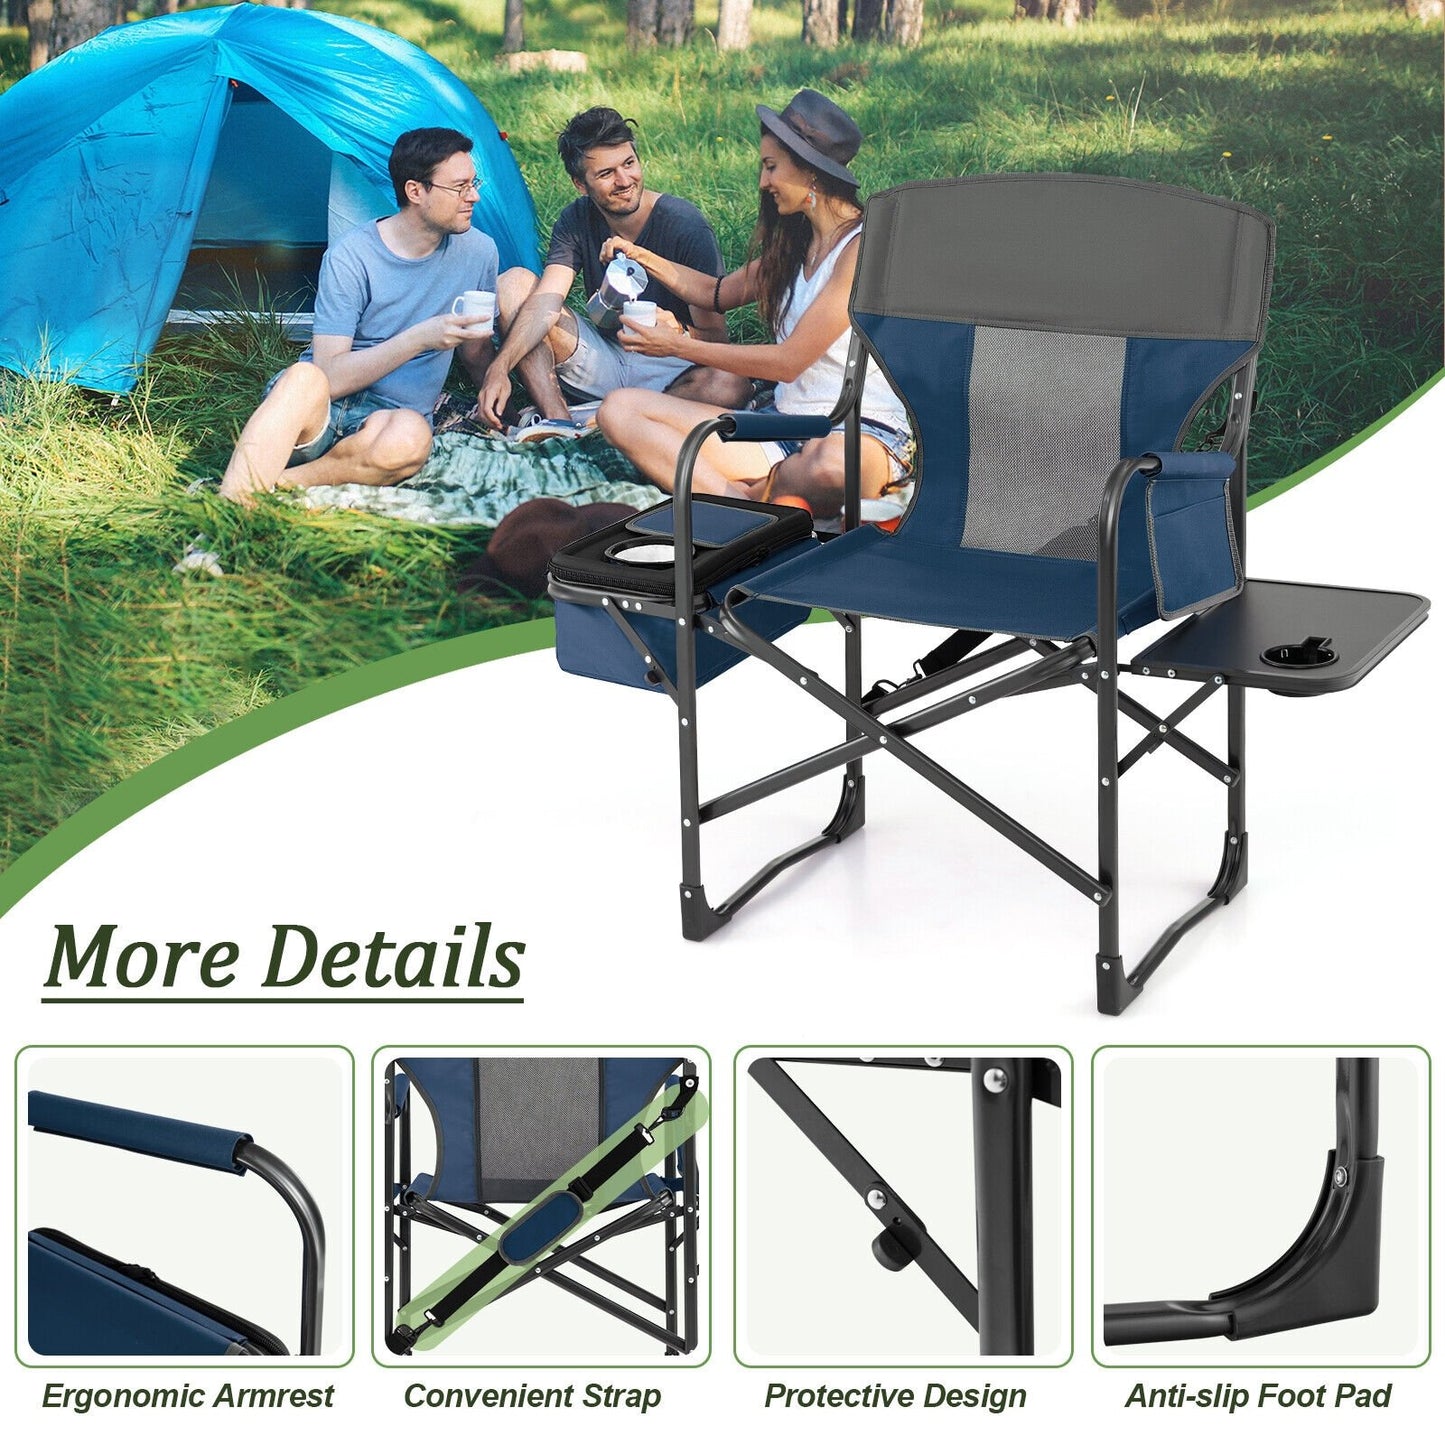 Folding Camping Directors Chair with Cooler Bag and Side Table, Blue